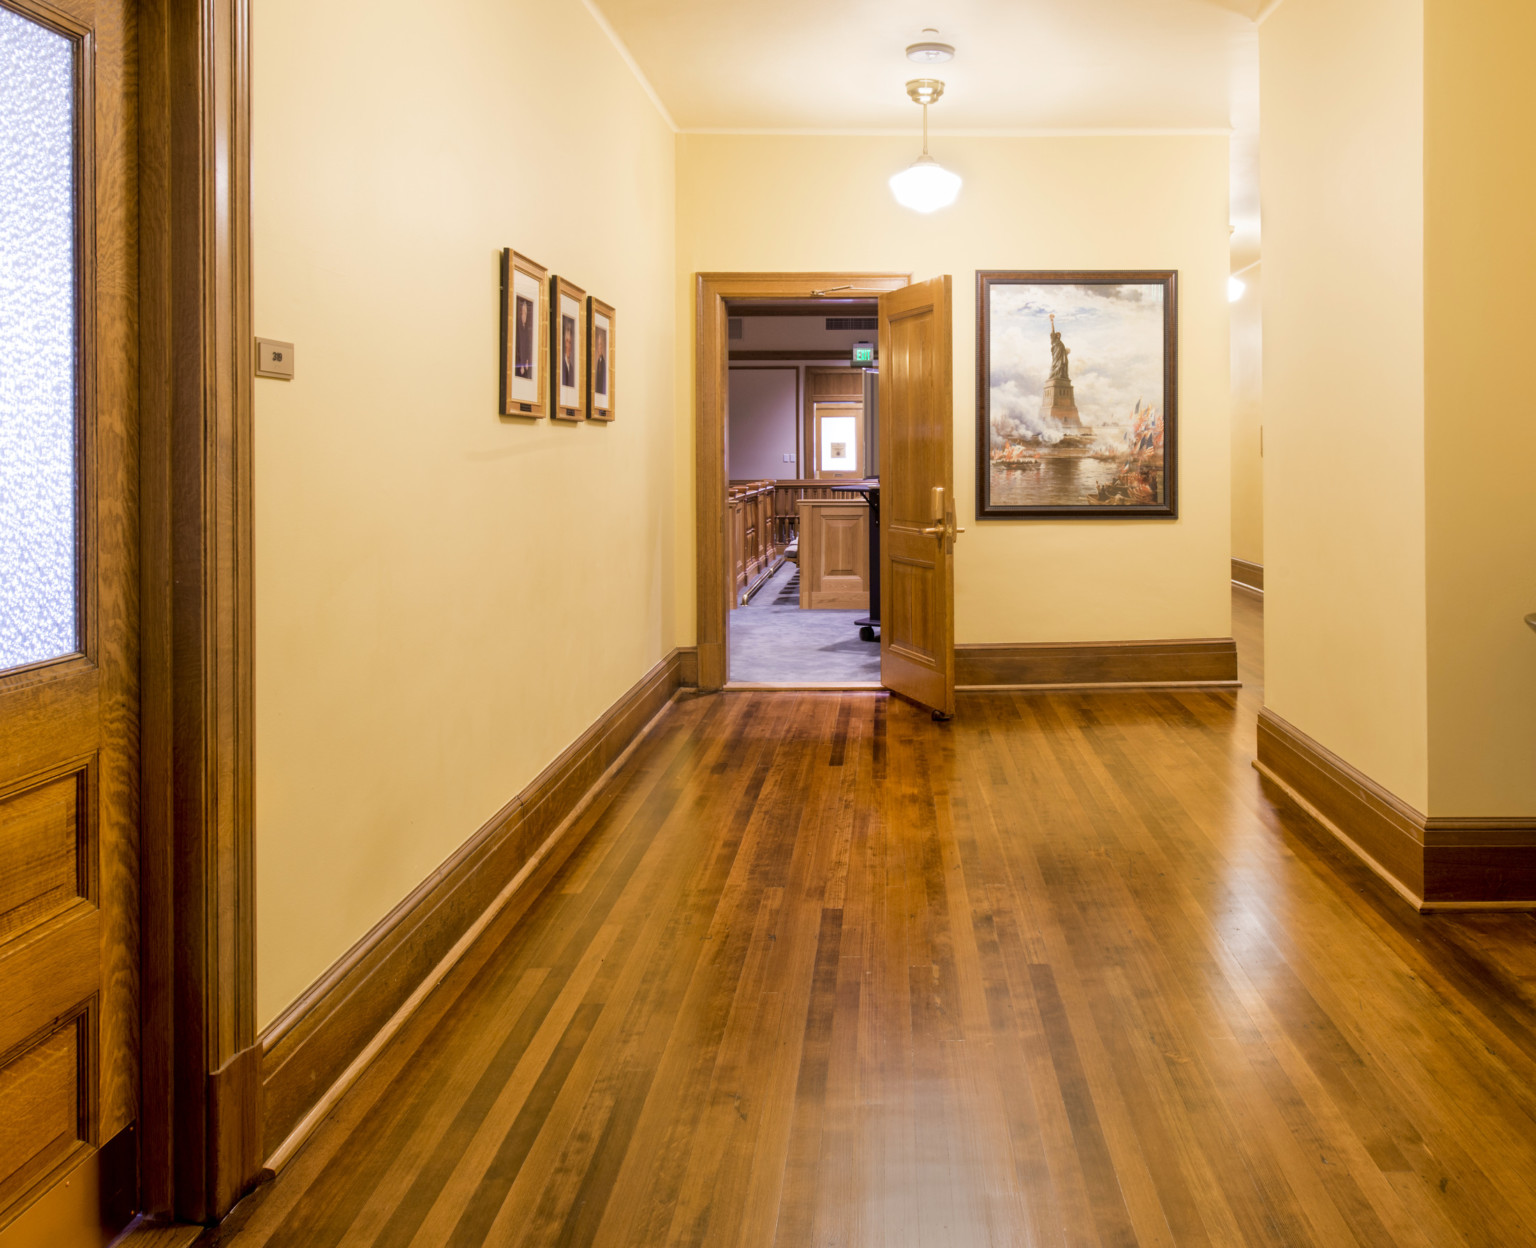 Cream colored walls along a winding hallway with hardwood floors and matching doors and baseboards